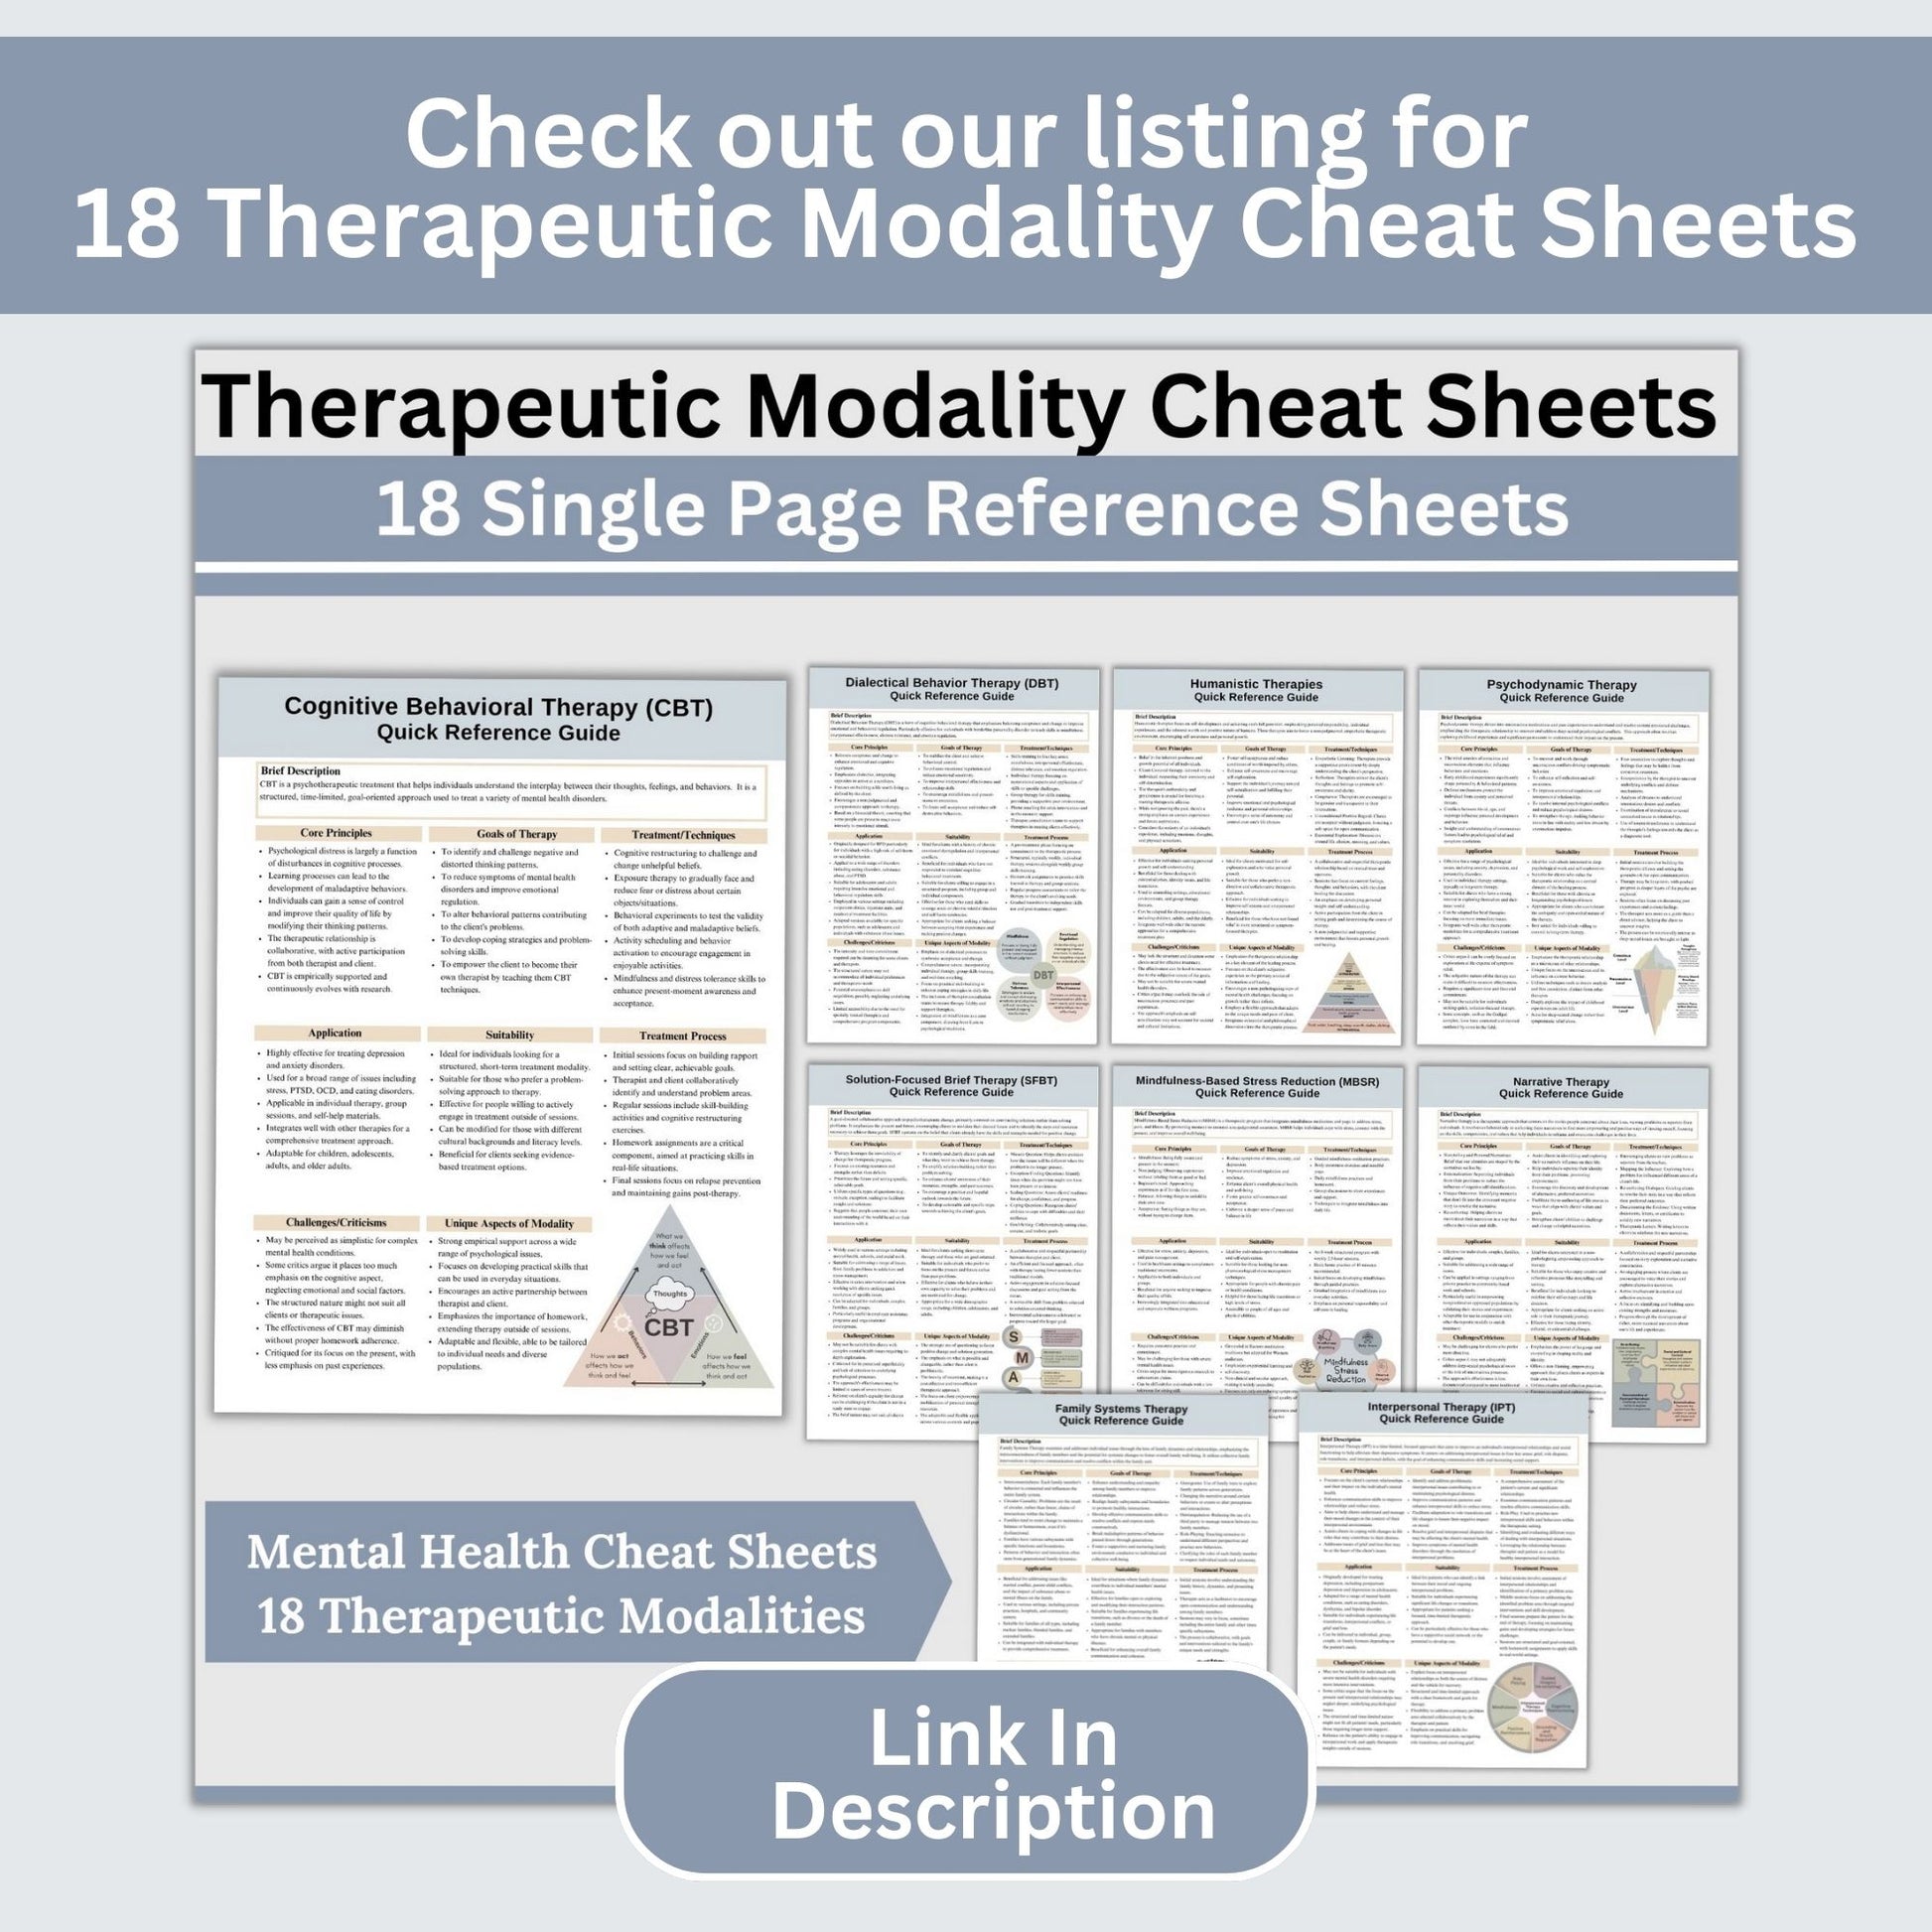 20 mental health infographic cards featuring different therapy modalities and mental health information! For therapists office, social workers, and school counselors, these 3x5 cards for workshops, therapy sessions, and psychoeducation